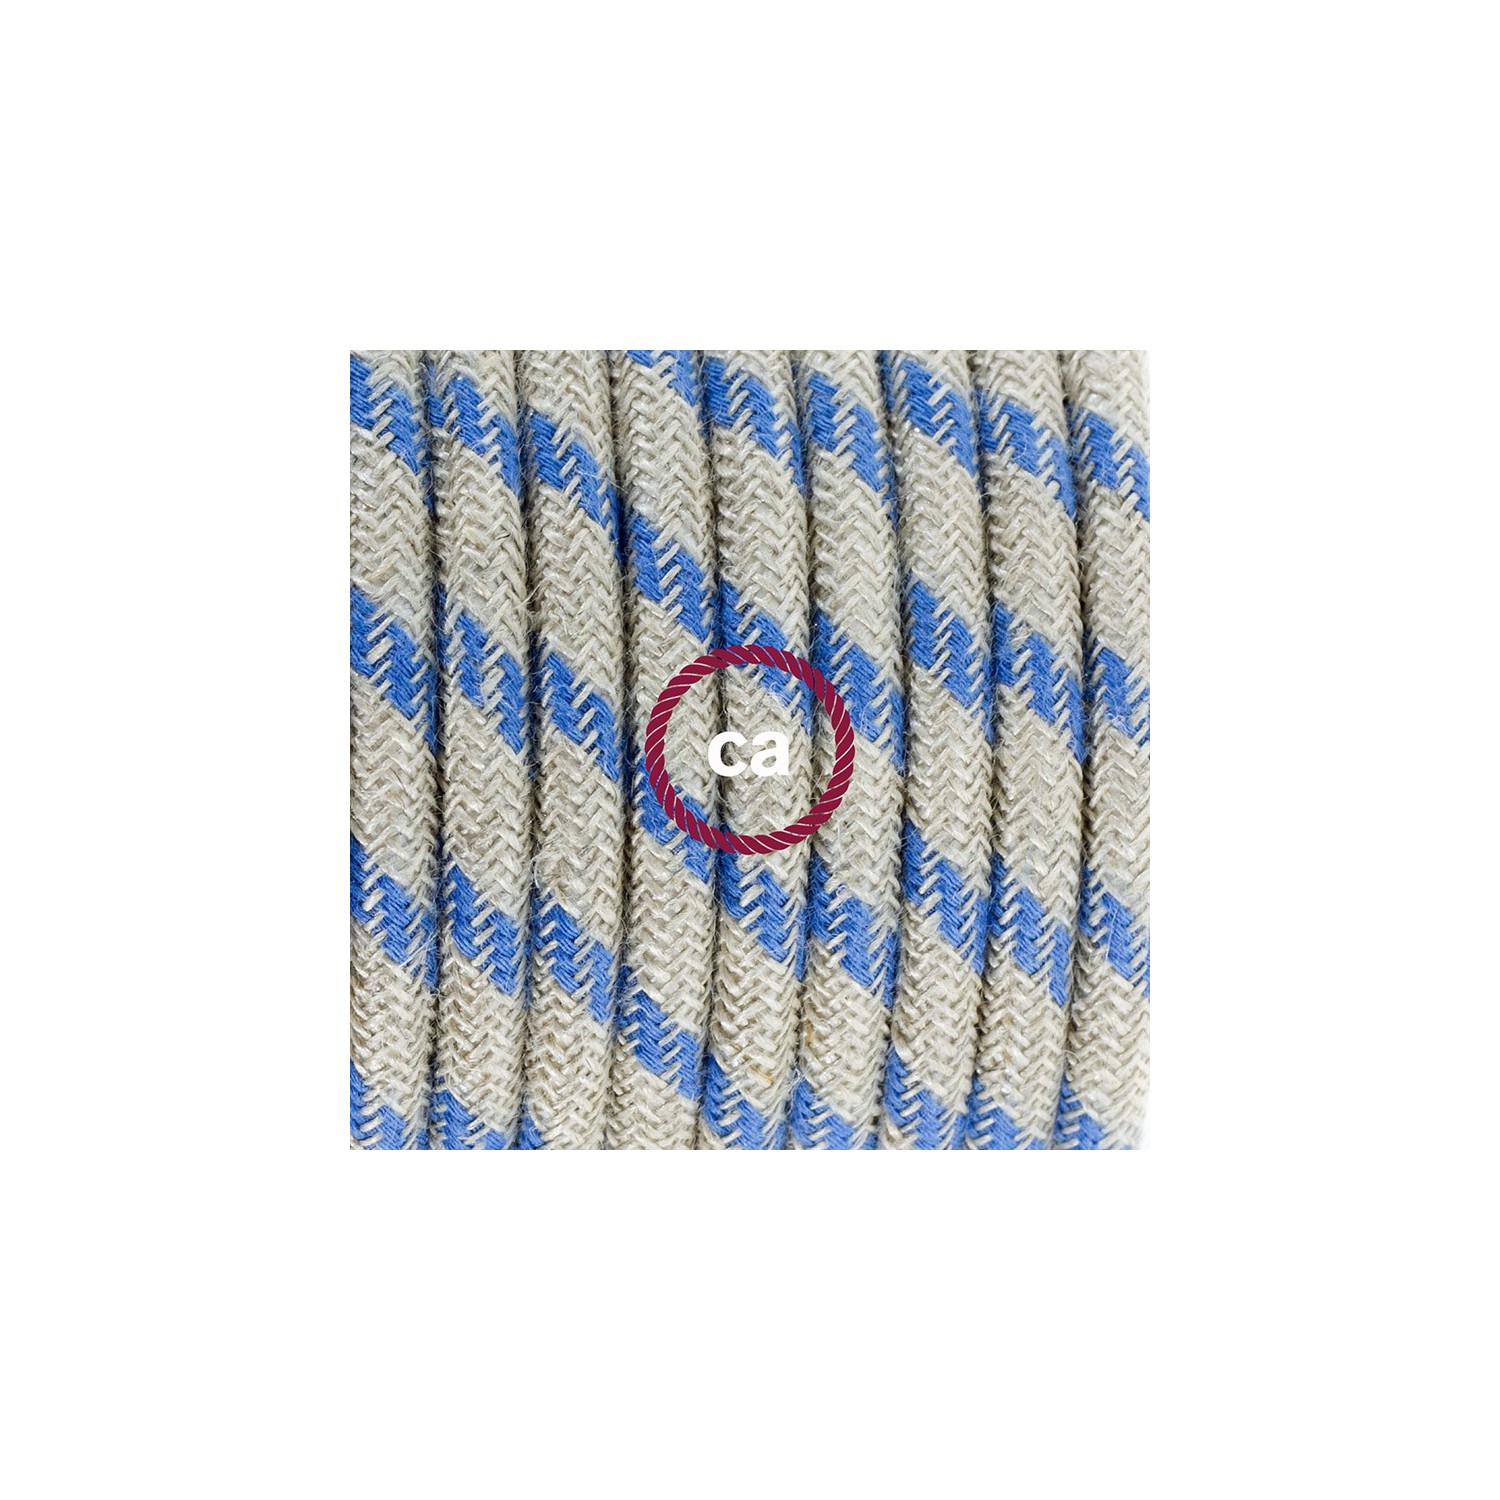 Wiring Pedestal, RD55 Blue Steward Stripes Cotton and Natural Linen 3 m. Choose the colour of the switch and plug.